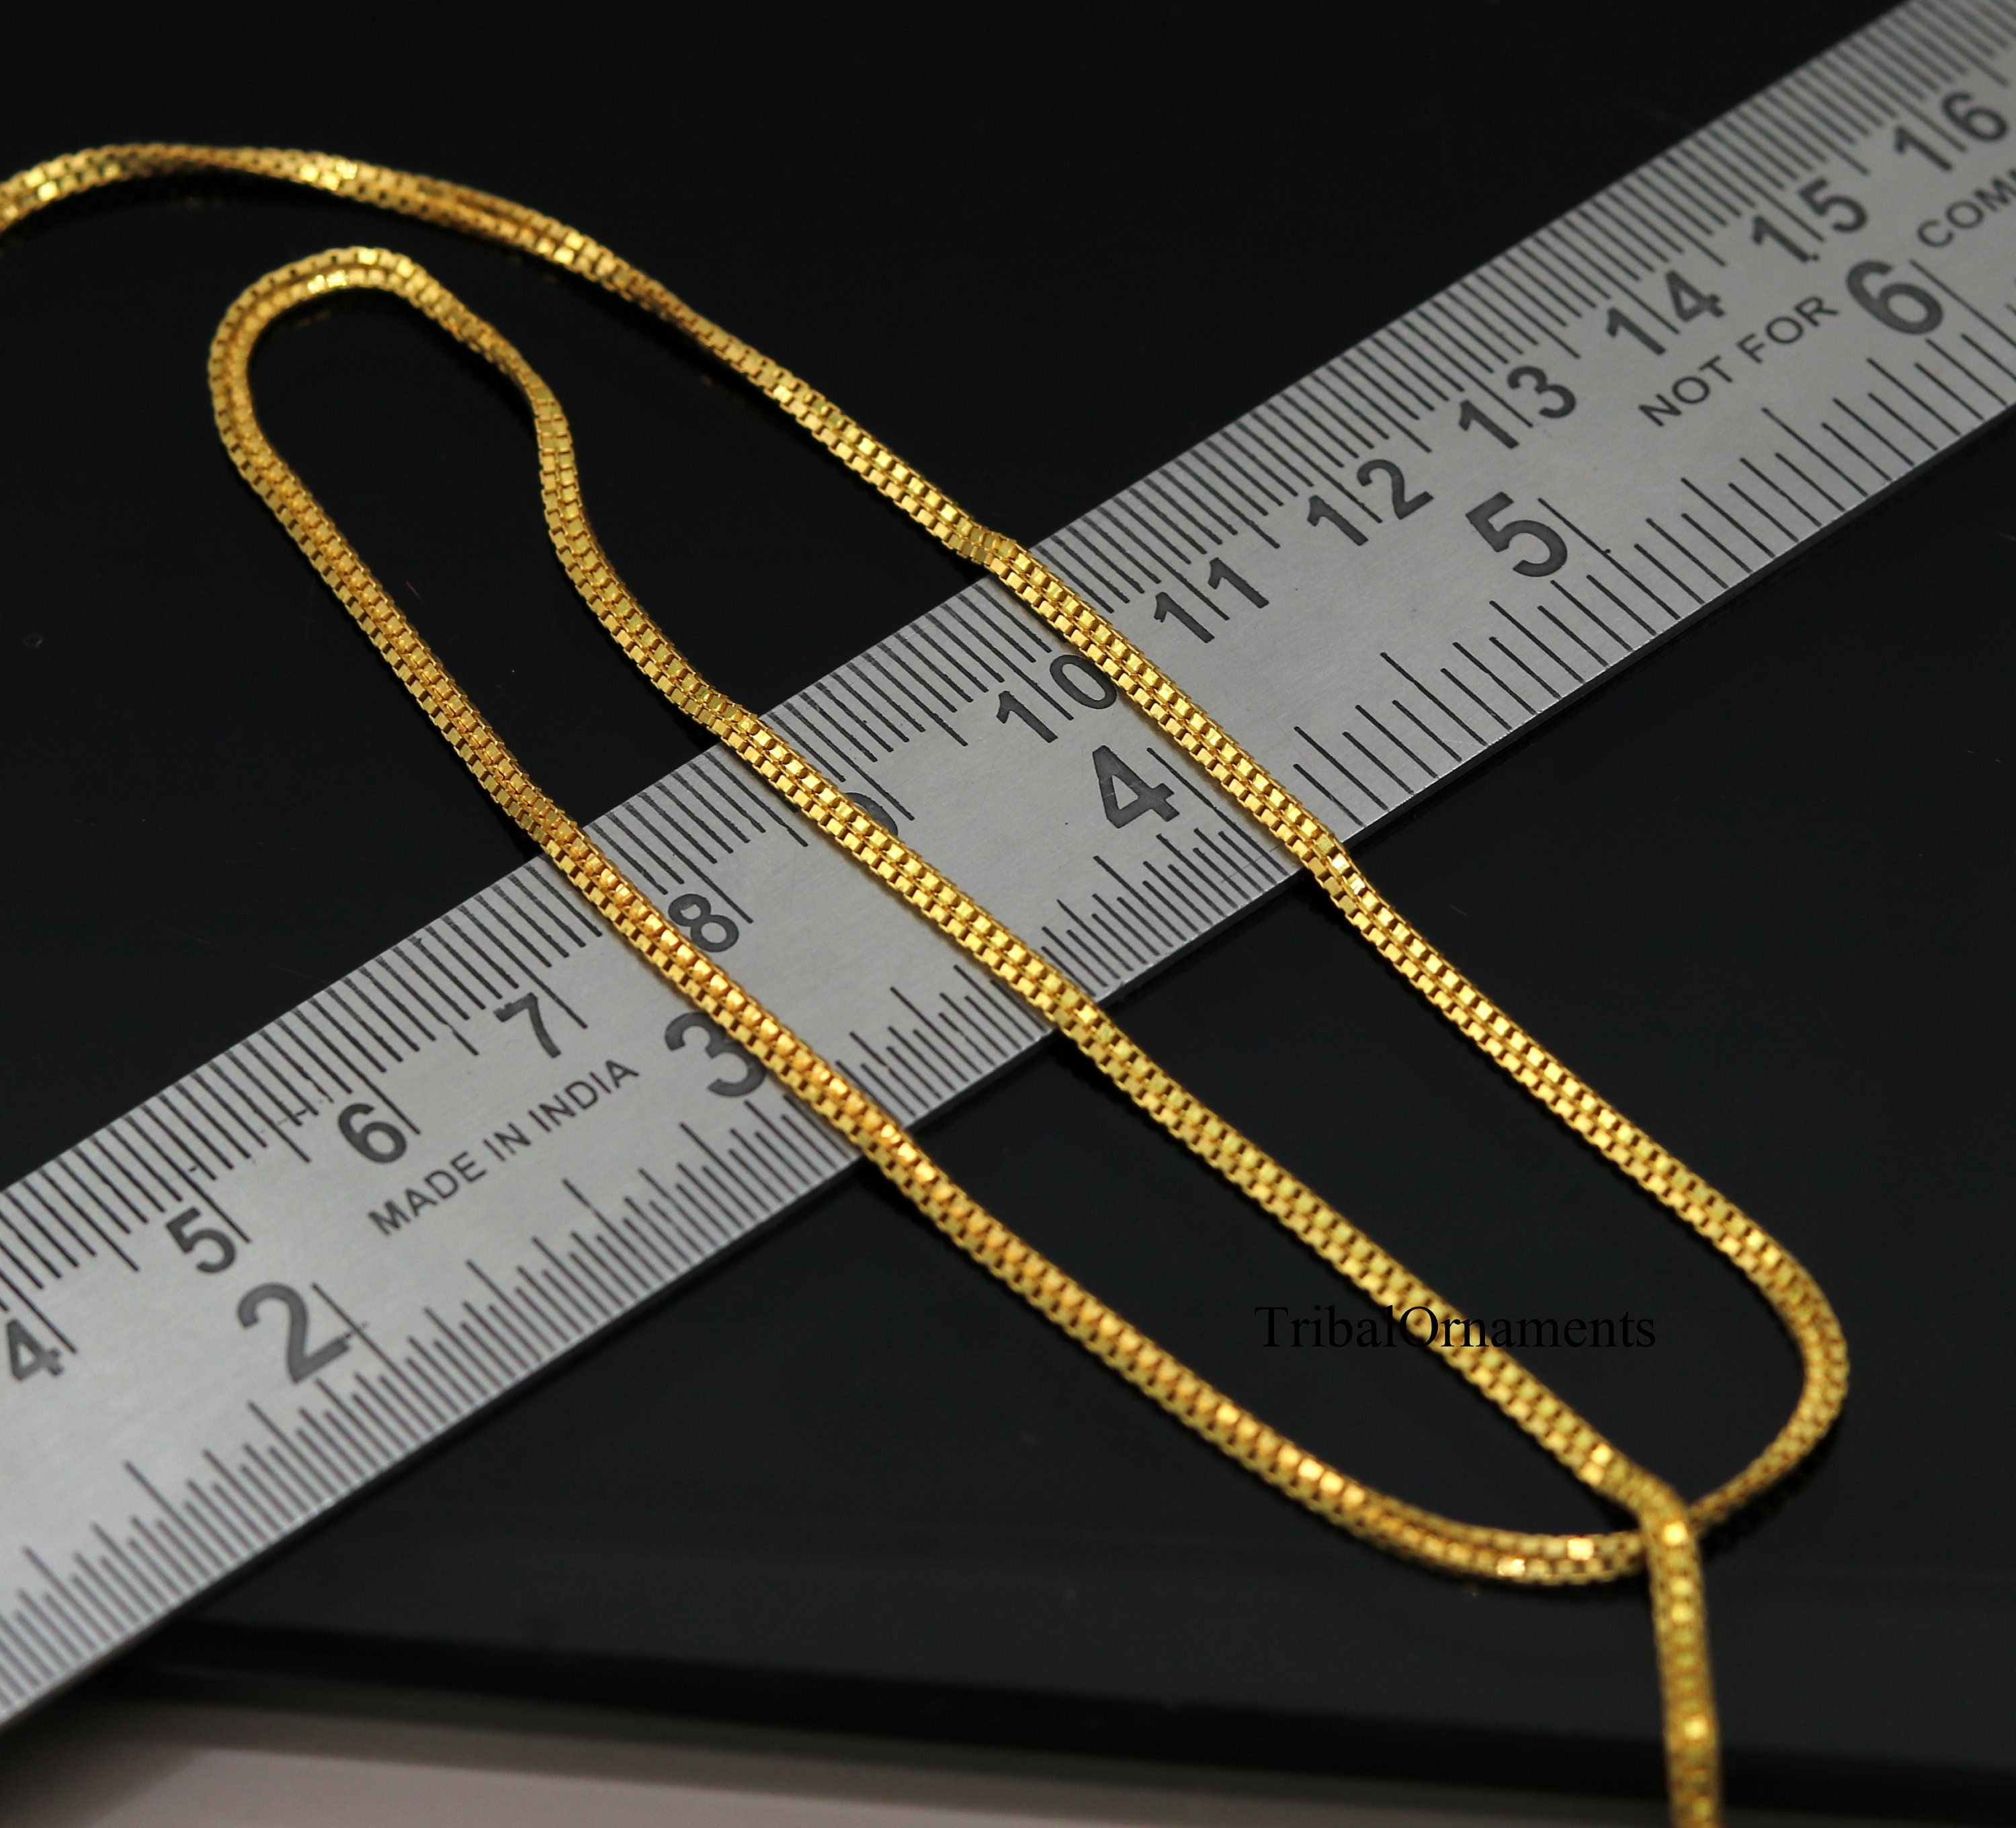 22kt Male Thick Golden Chain For Men, Approx 27-28 Gm, Packaging Type: Box